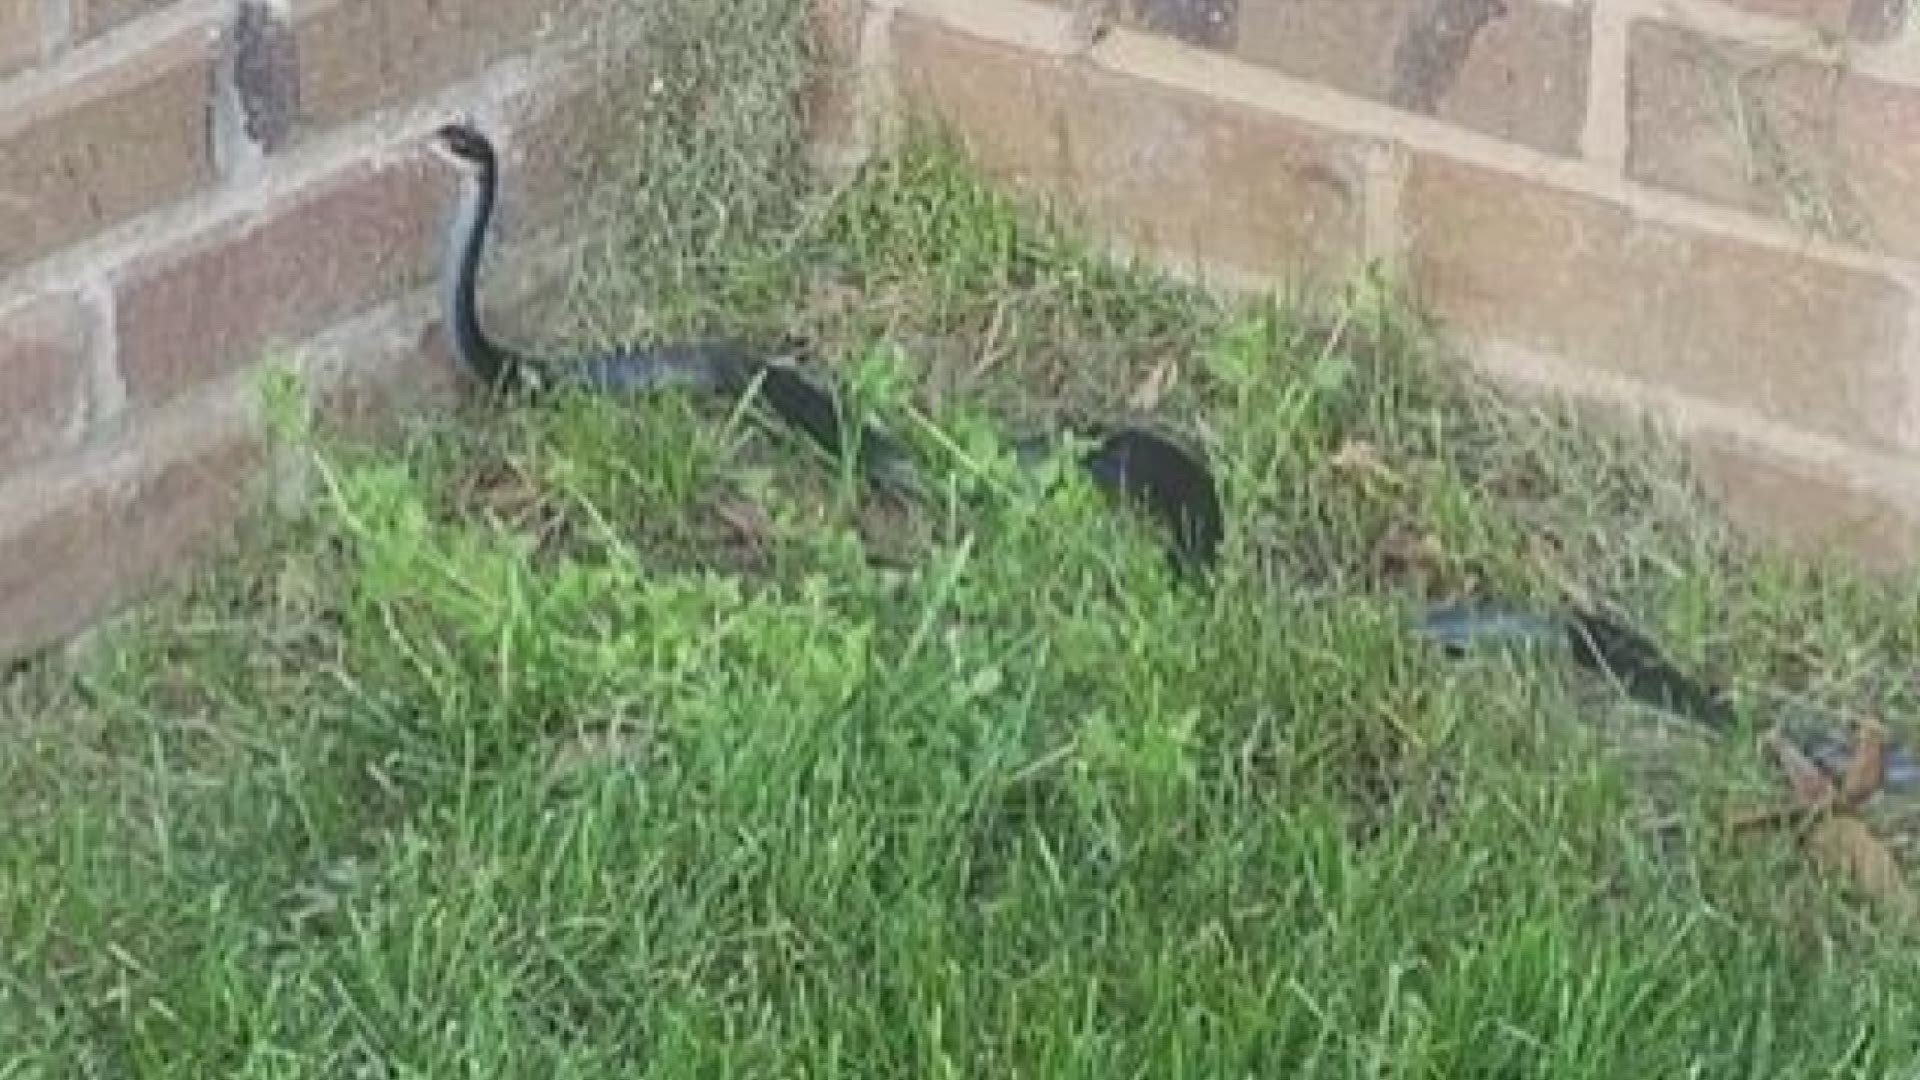 Snakes In The Yard And Other FAQs